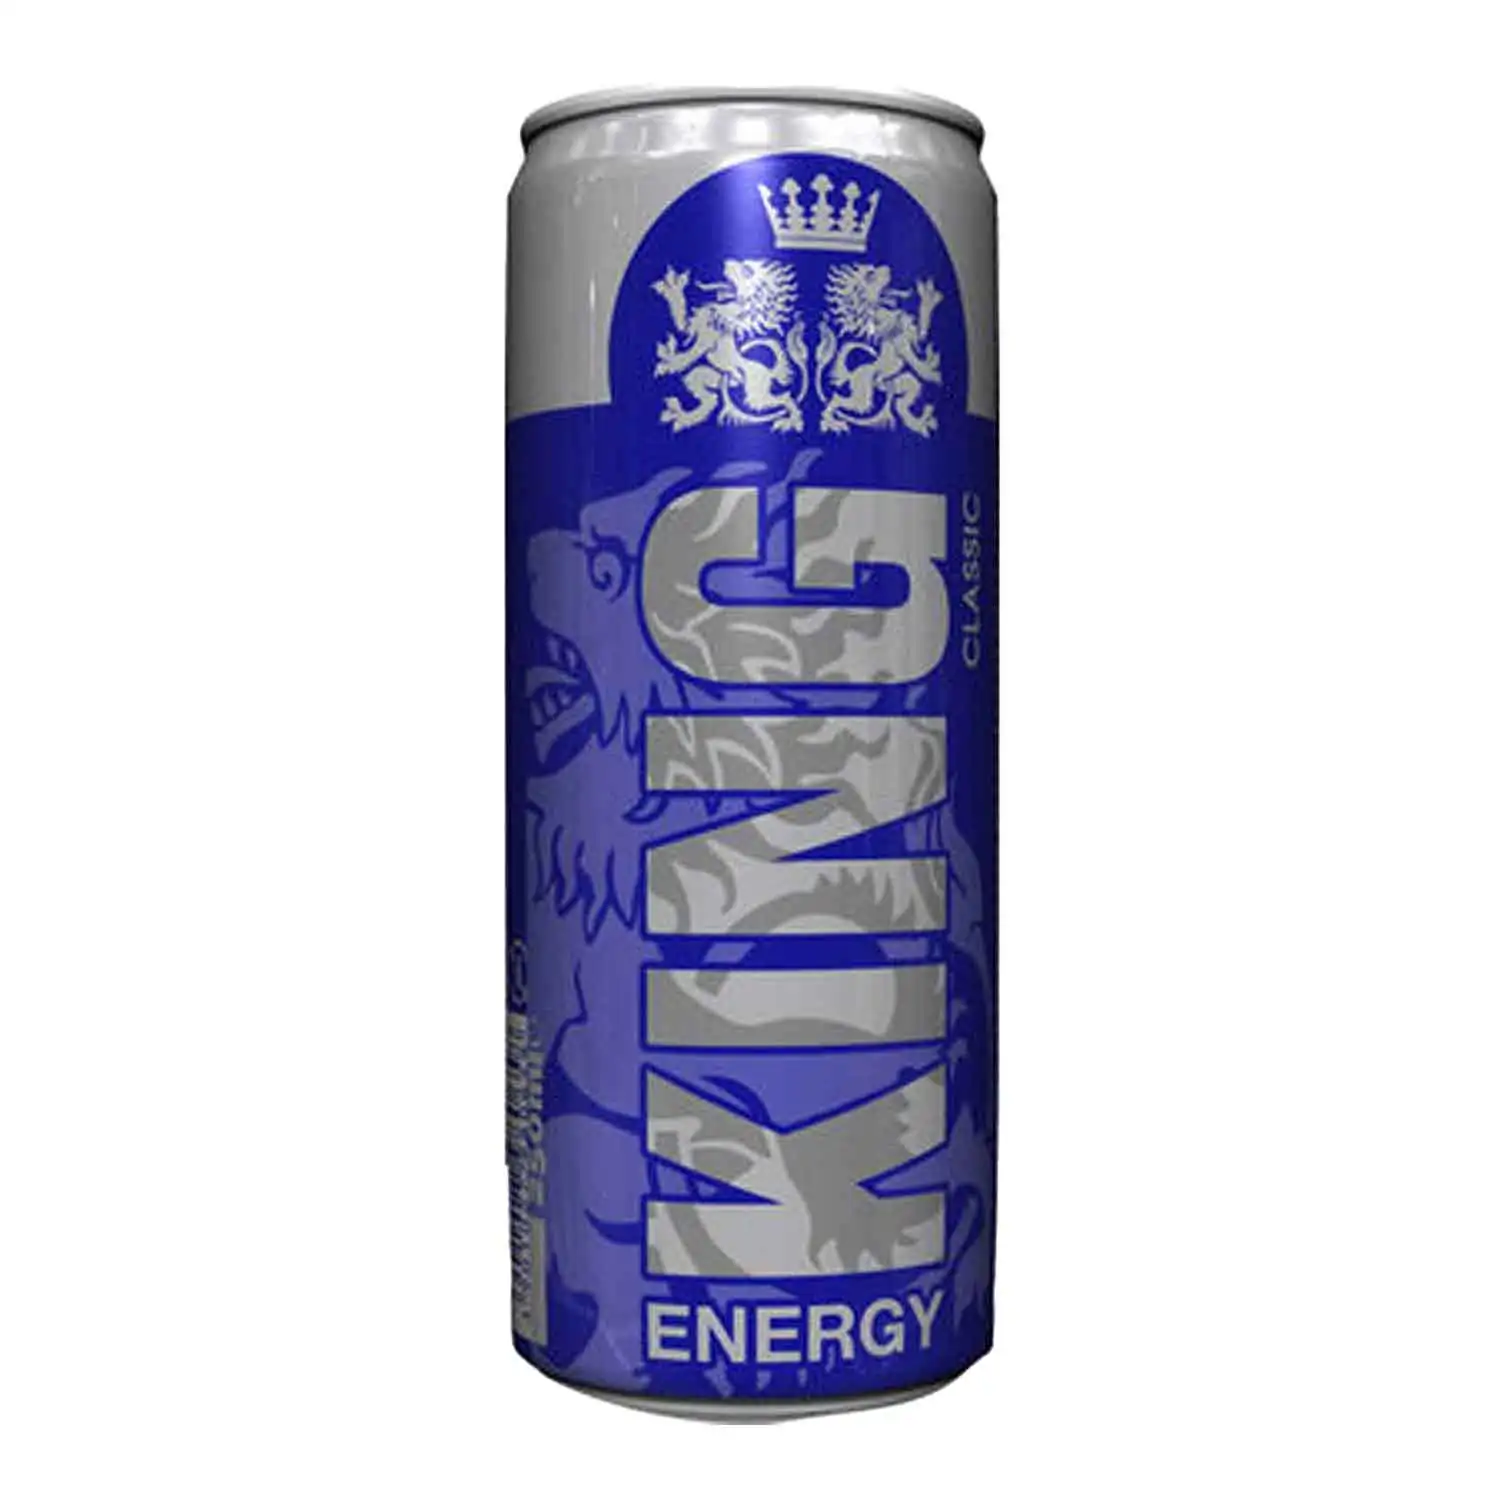 King energy 25cl - Buy at Real Tobacco